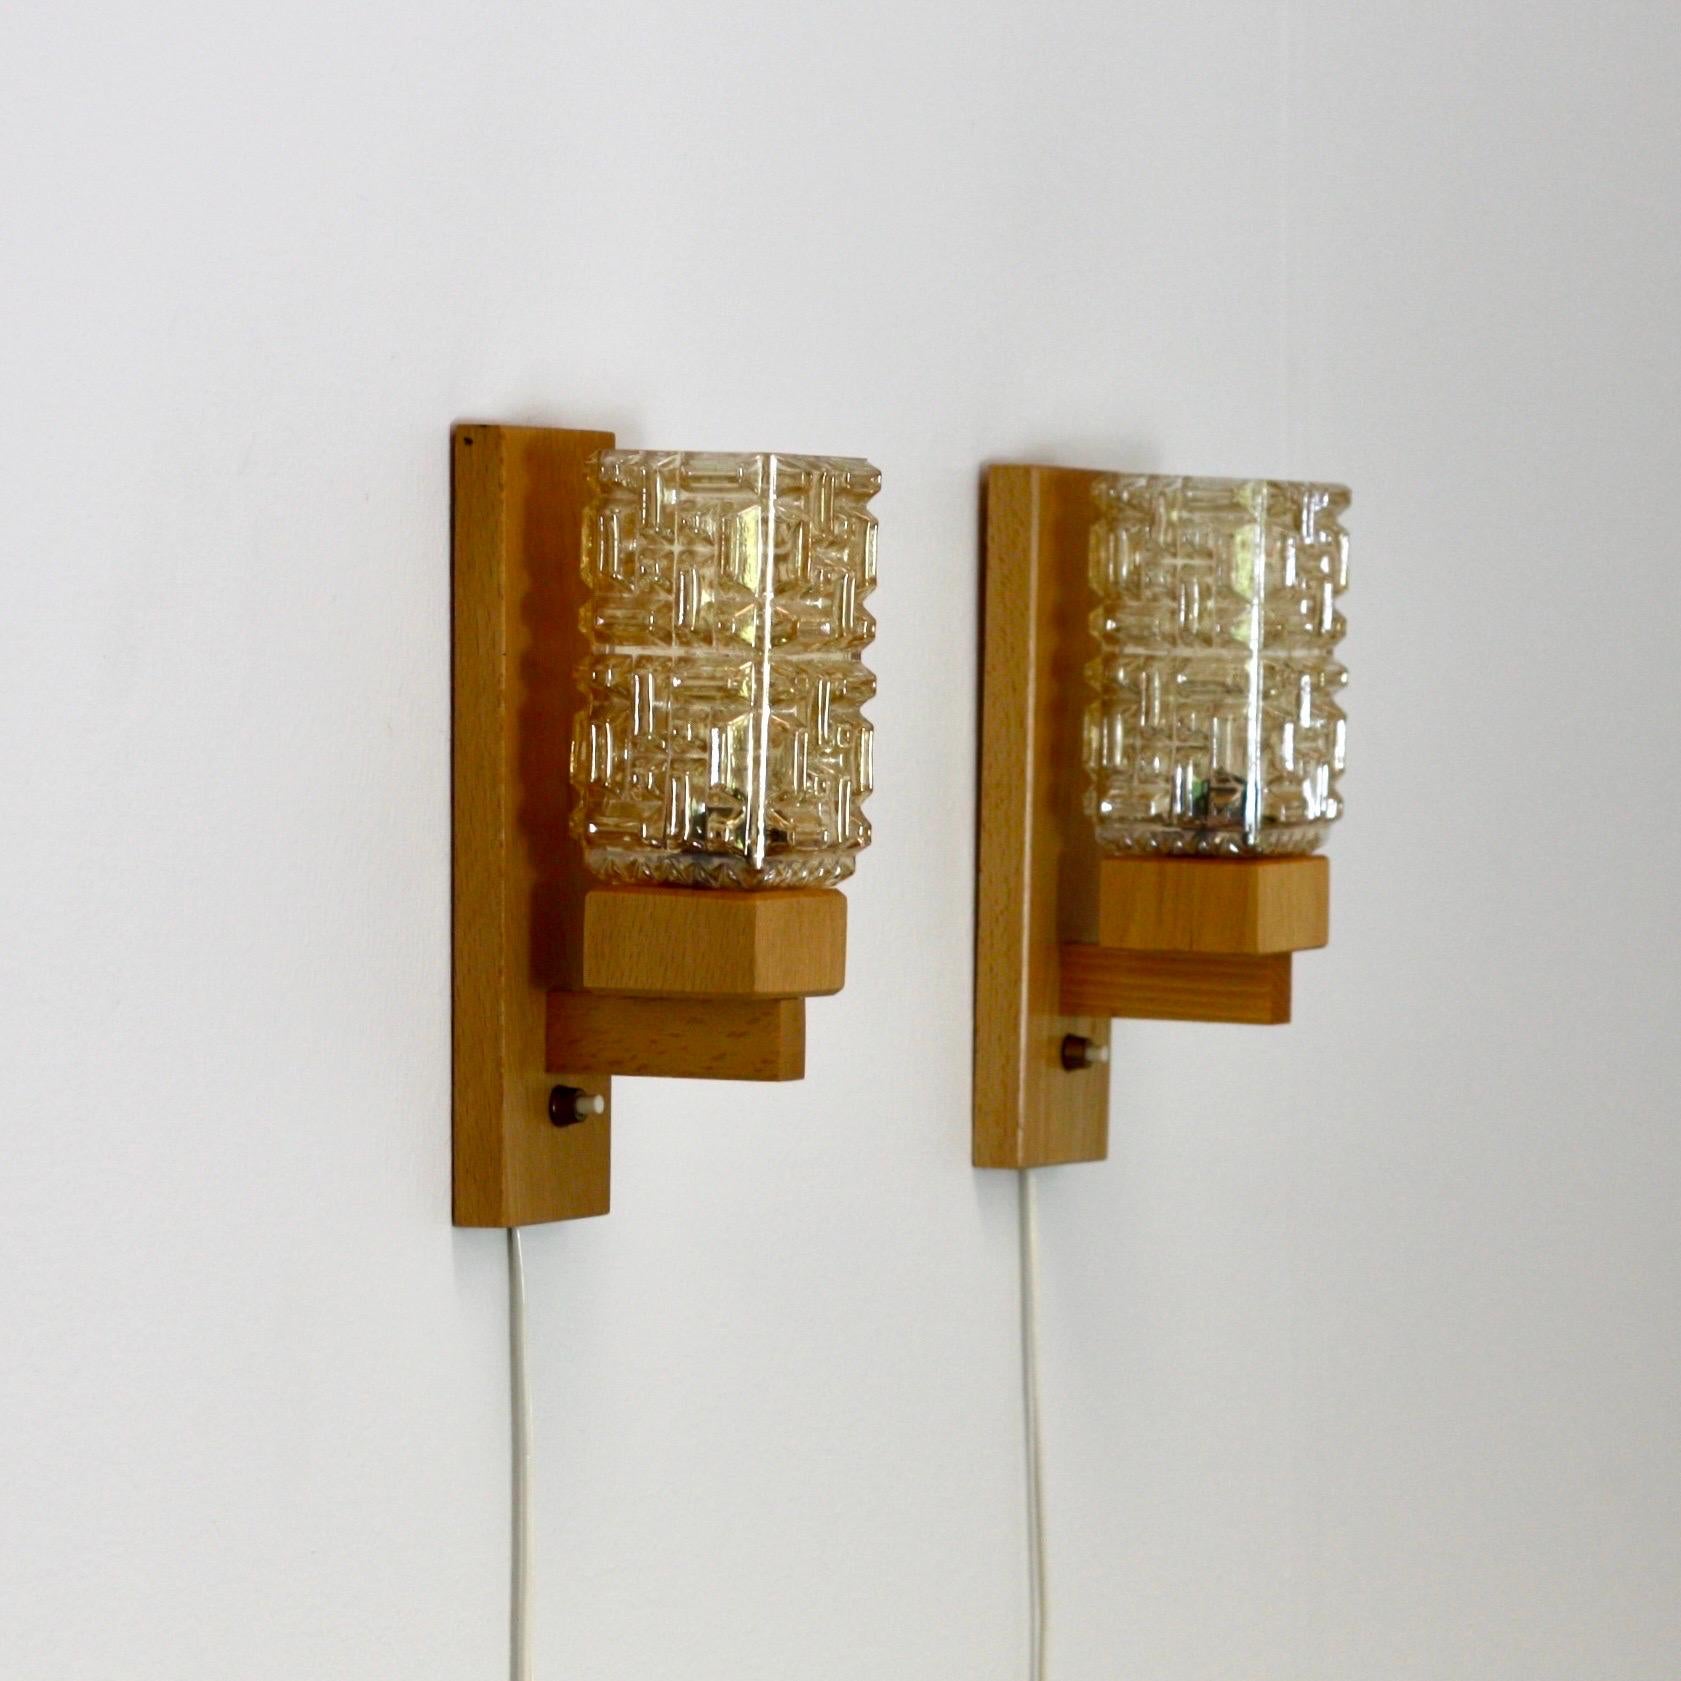 Set of 'Vitrika' Wall Lamps in Beech wood & Amber Glass, Denmark, 1970s For Sale 6